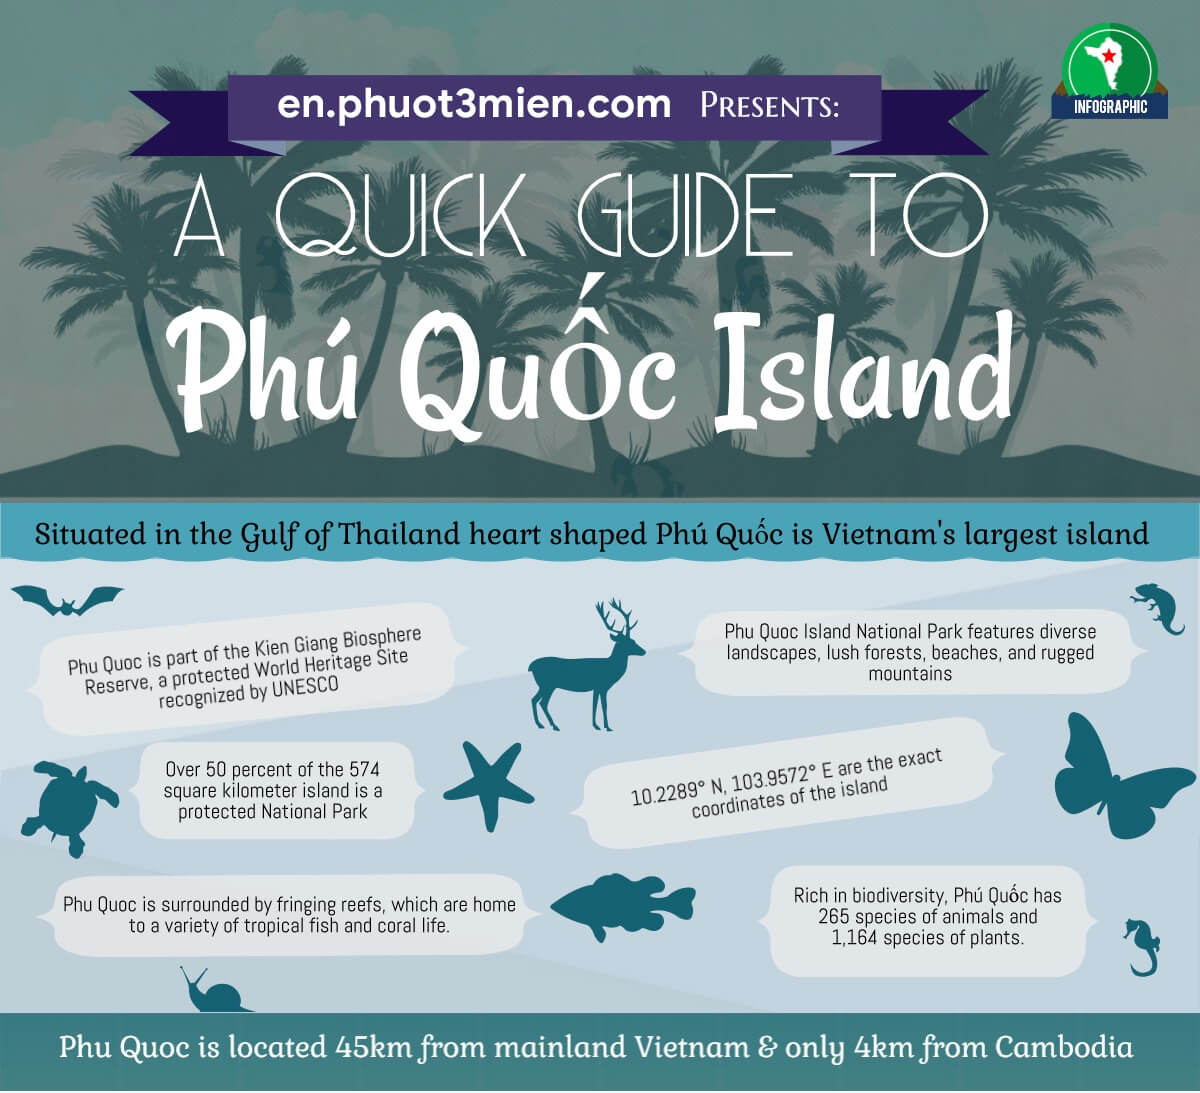 About phu quoc island